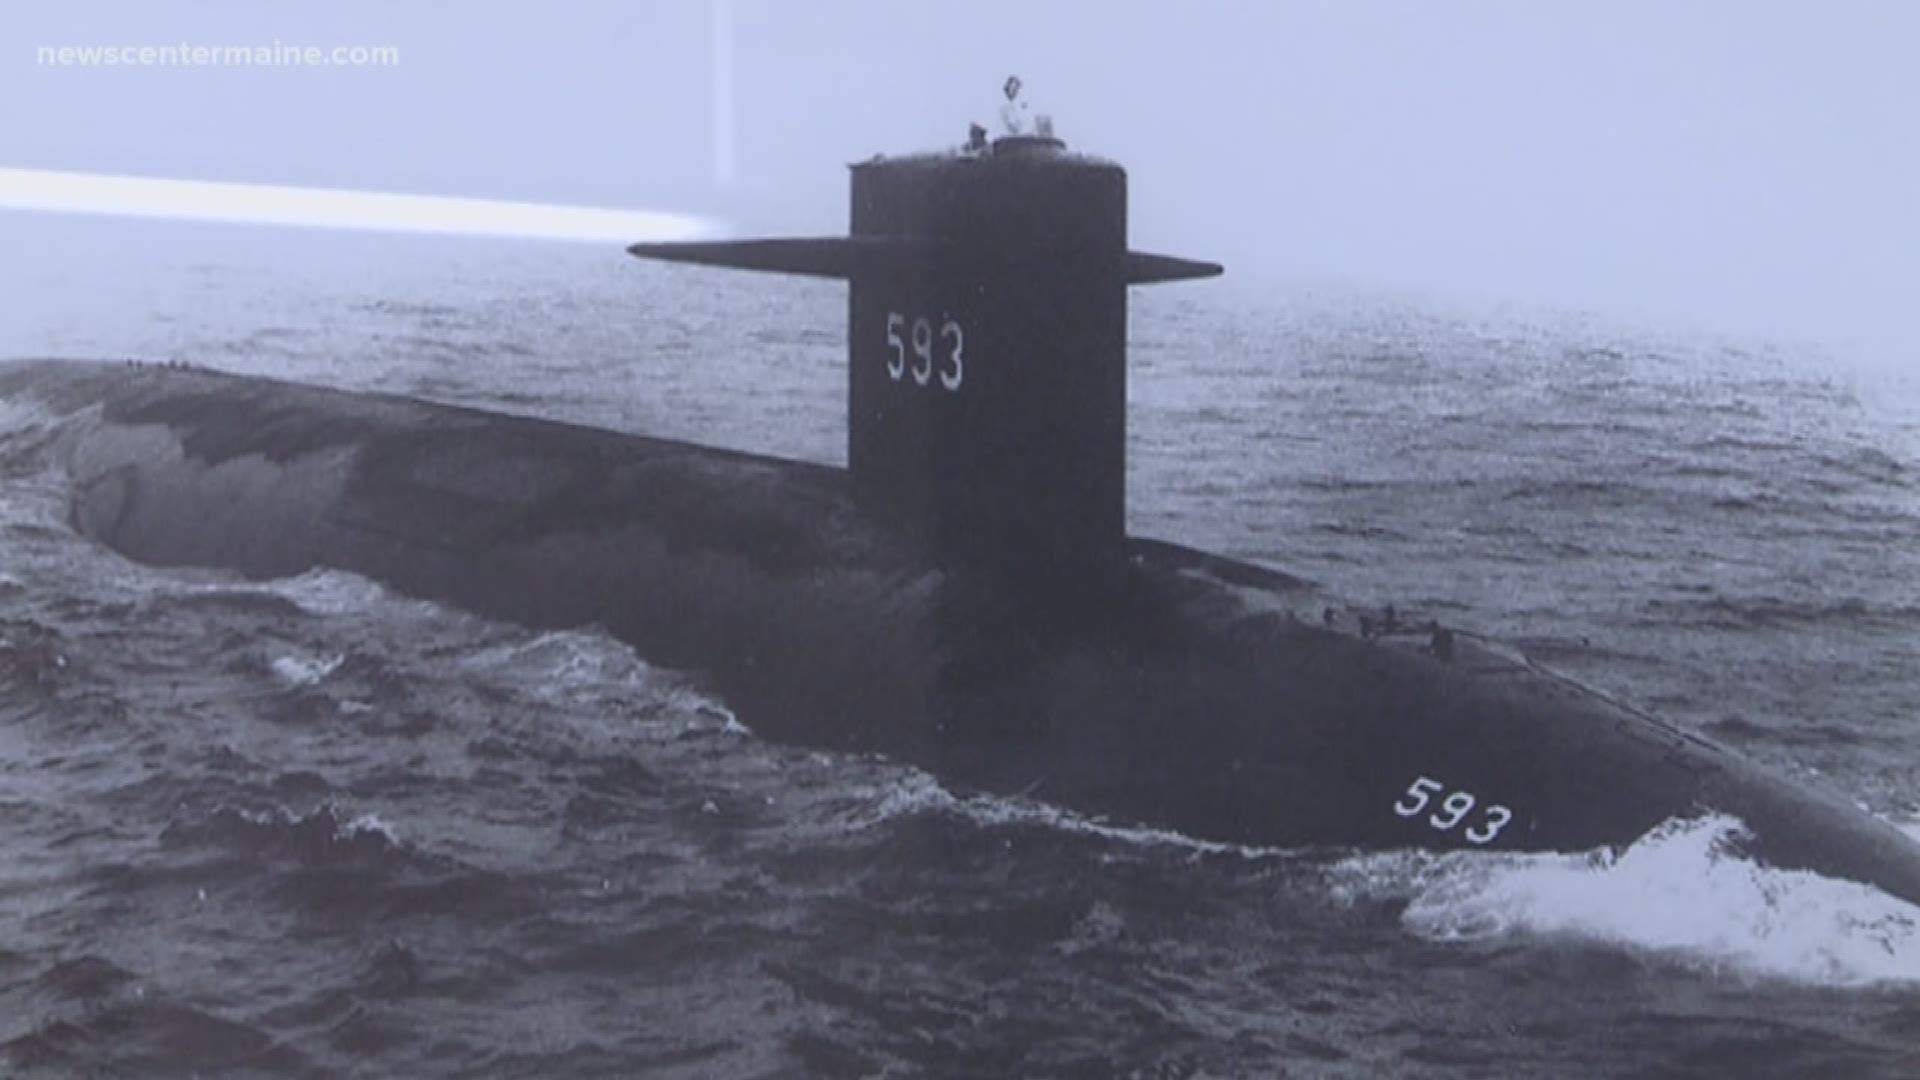 A memorial for the U.S.S. Thresher nuclear submarine, which sank off the coast of New England 55 years ago, will be installed at Arlington National Cemetery.